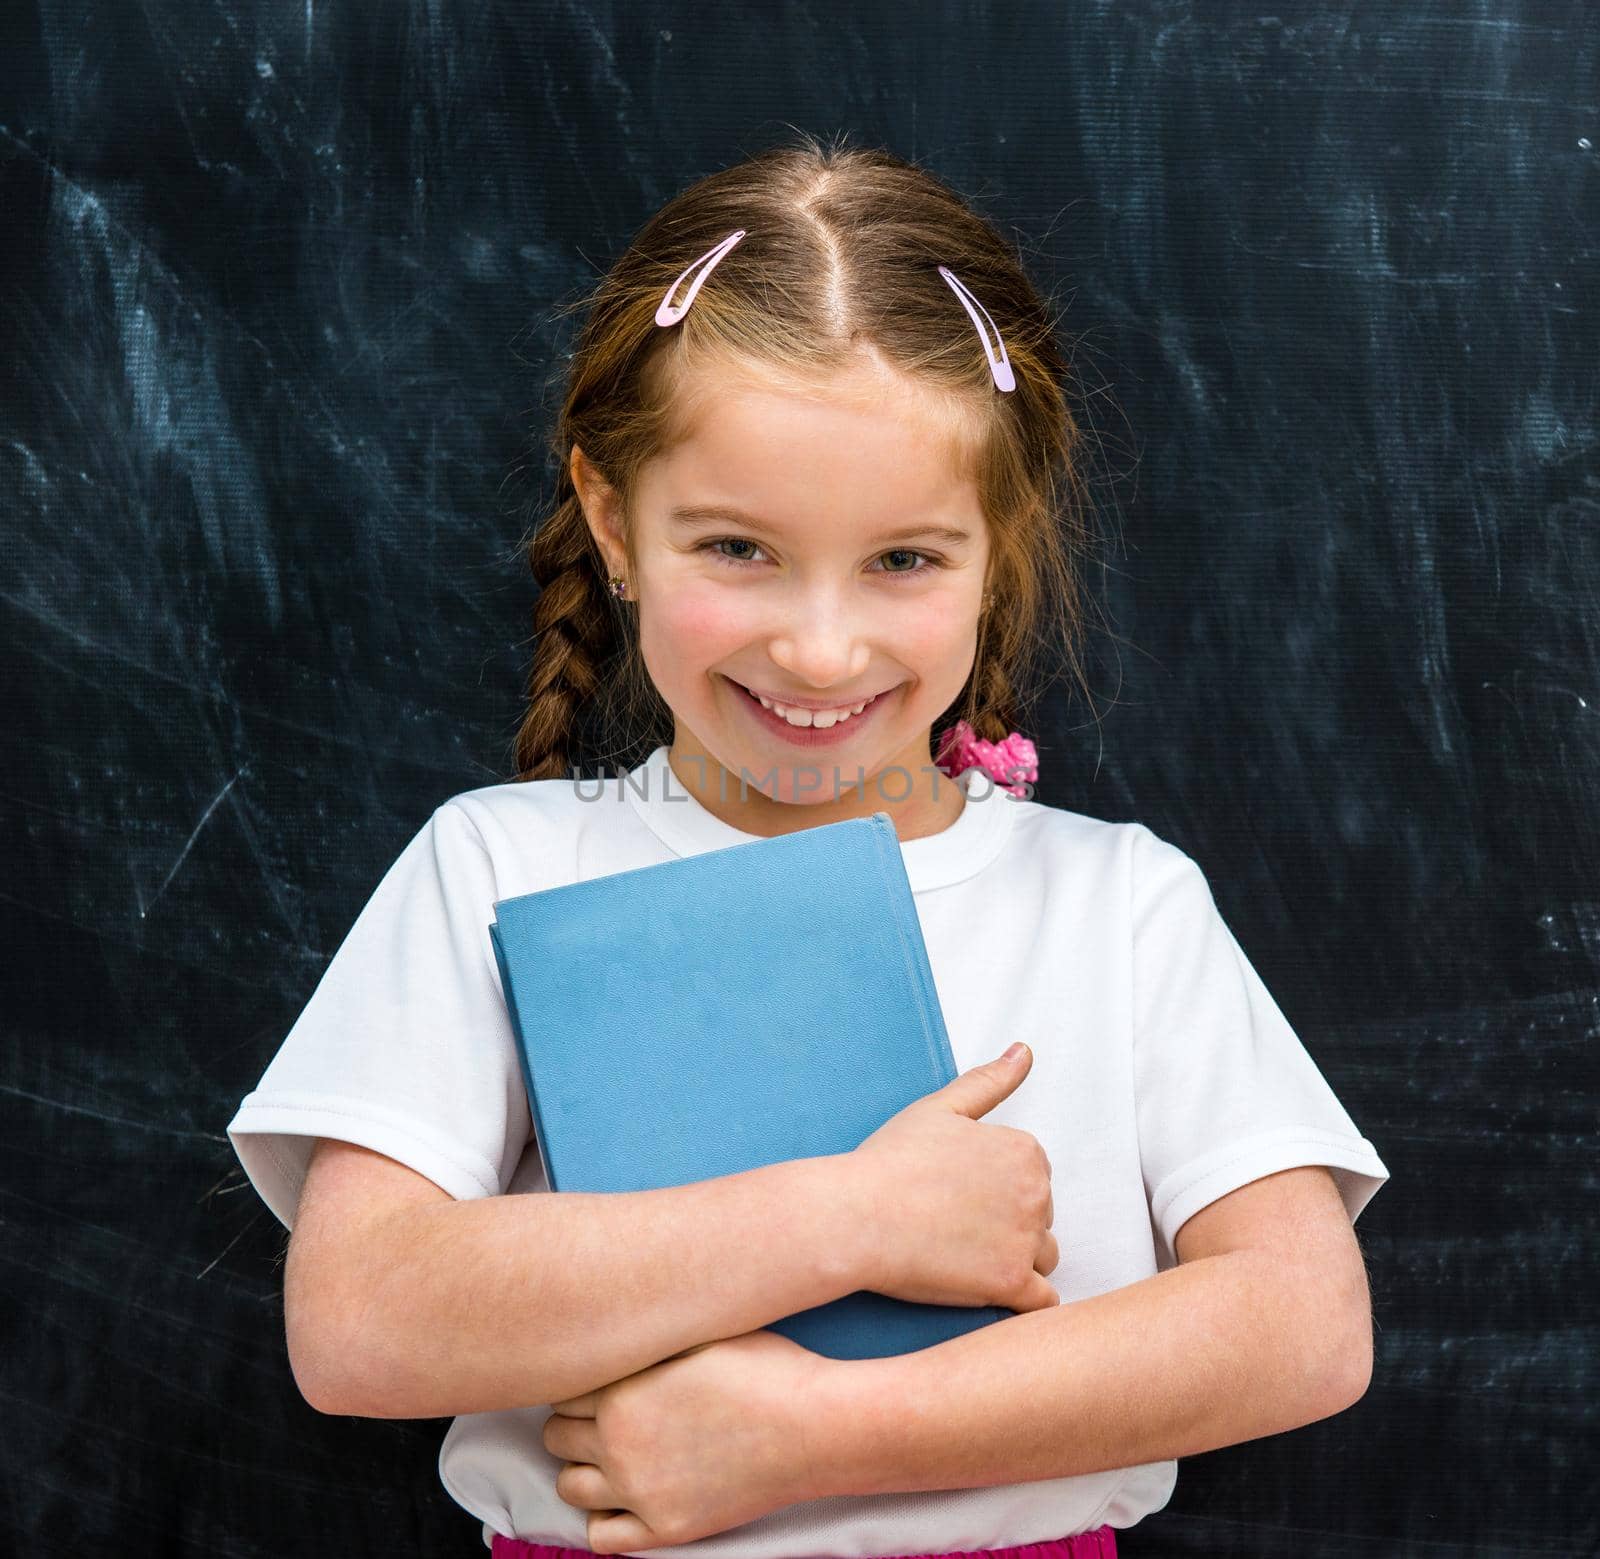 cute little girl with a blue book in hands smiling on the background of the school board